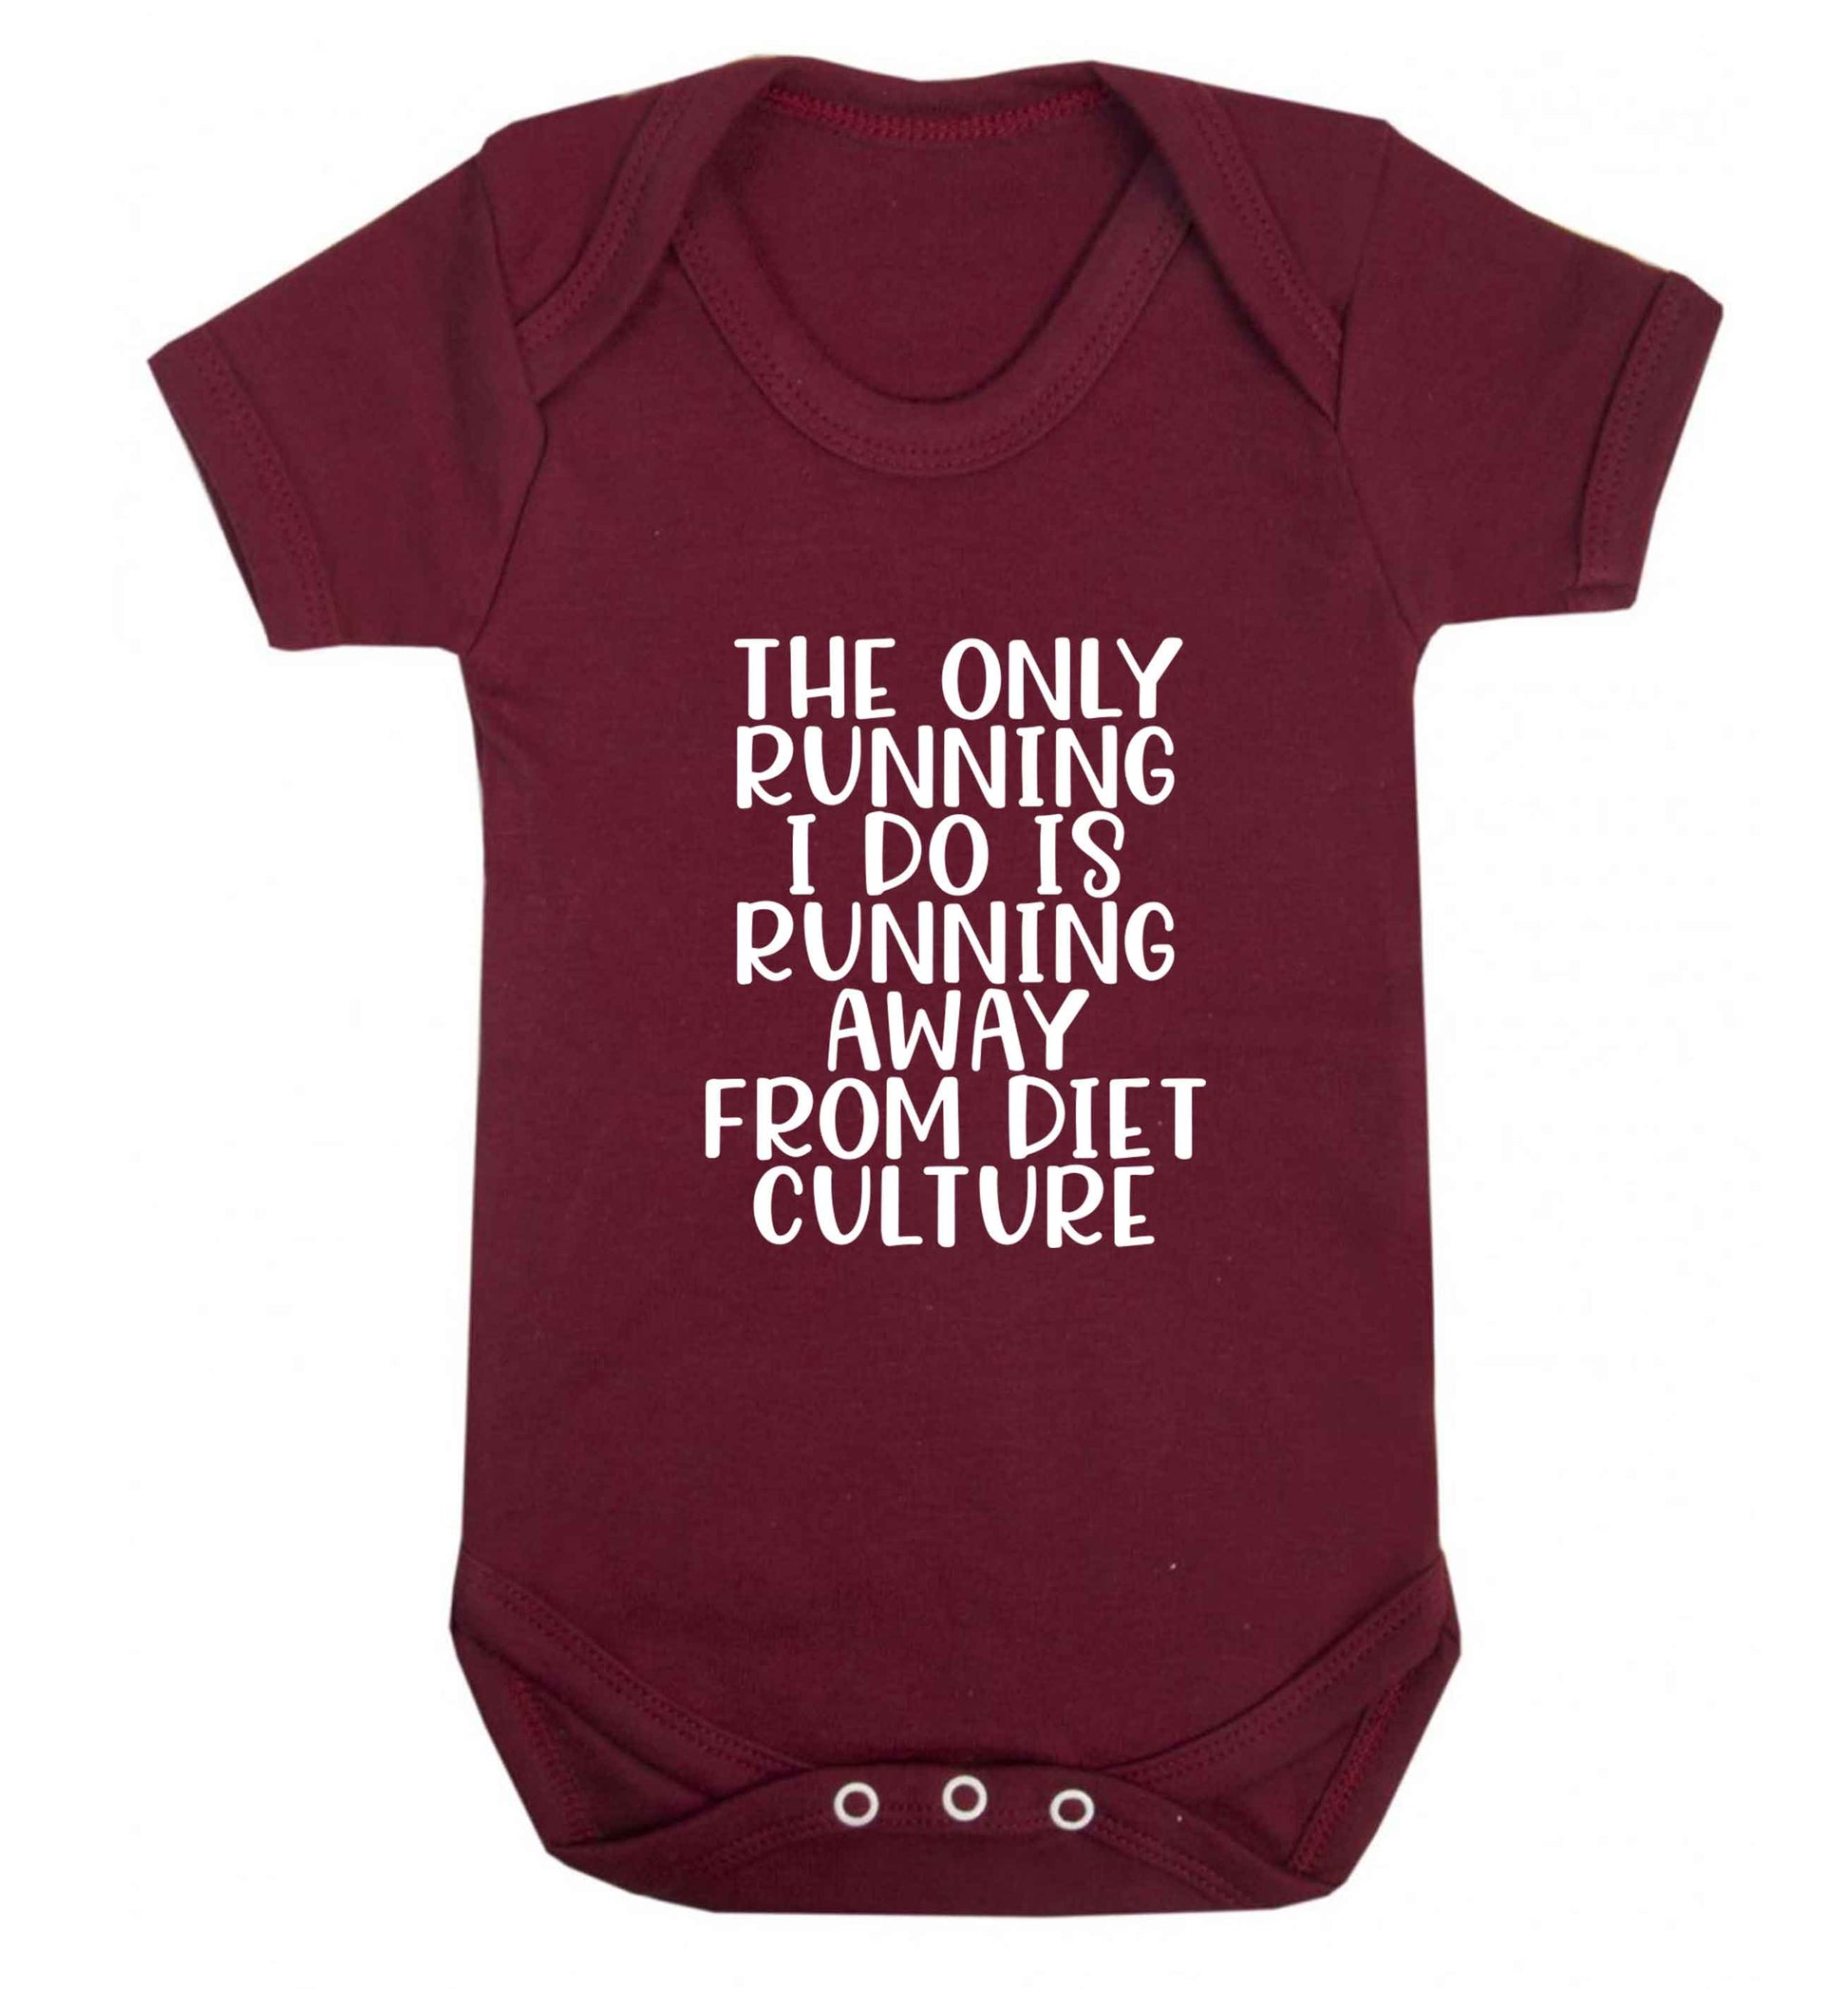 The only running I do is running away from diet culture baby vest maroon 18-24 months